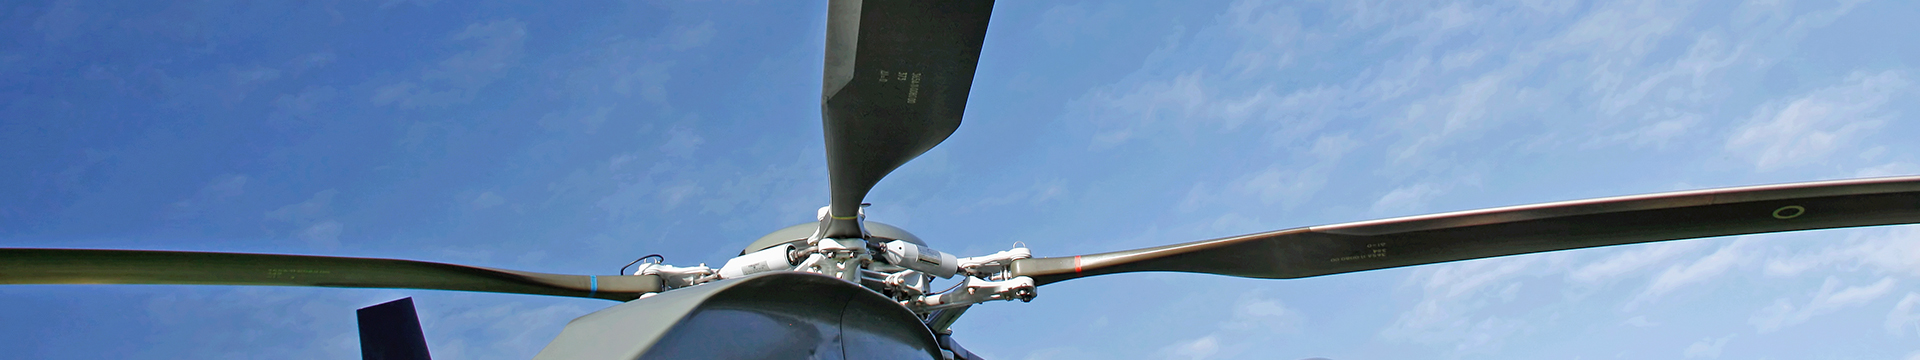 Ensuring Safety & Efficiency with 3D Metrology Solutions for Rotor Blades